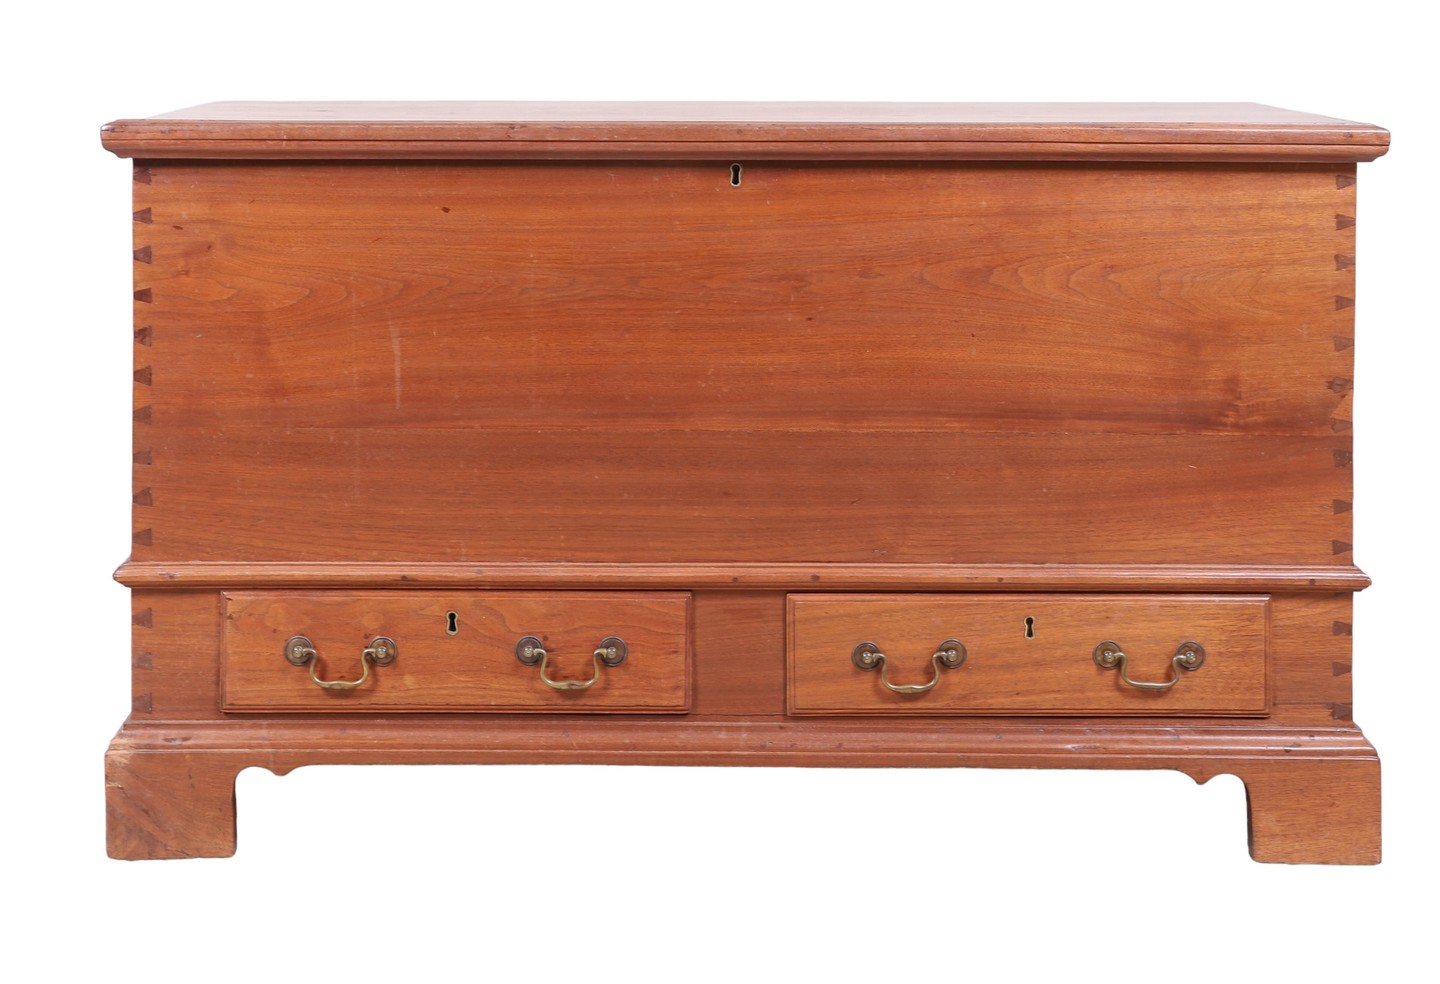 Cherry dovetailed blanket chest 27a535